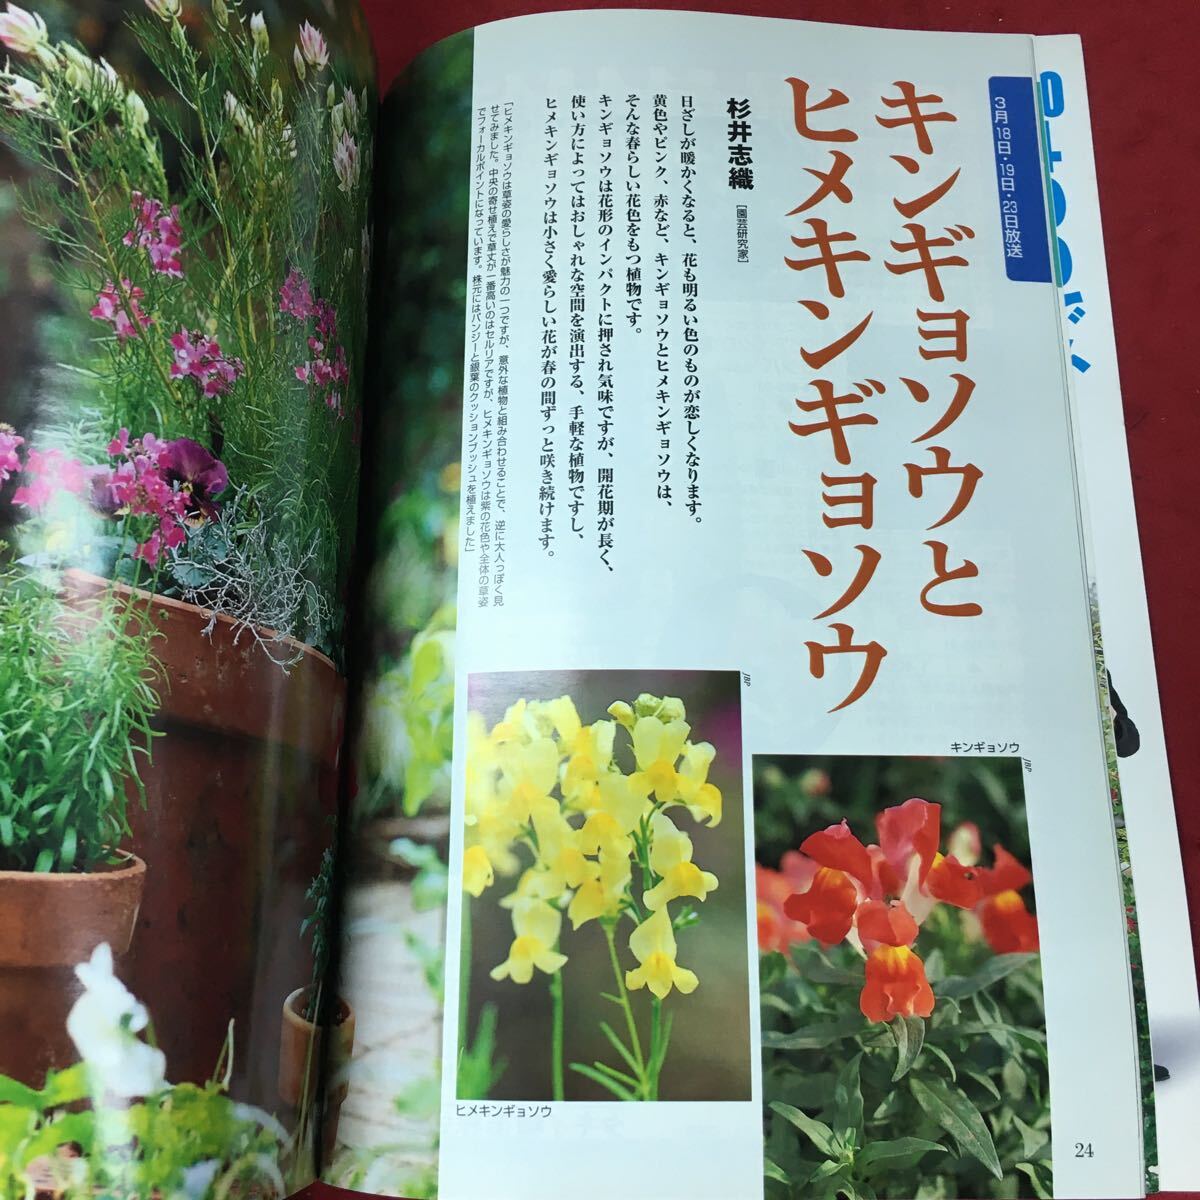 h-251 *4 NHK hobby. gardening 2001 year 3 month number 2001 year 3 month 1 day issue Japan broadcast publish association magazine gardening hobby clematis gold gyo saw mimo The 